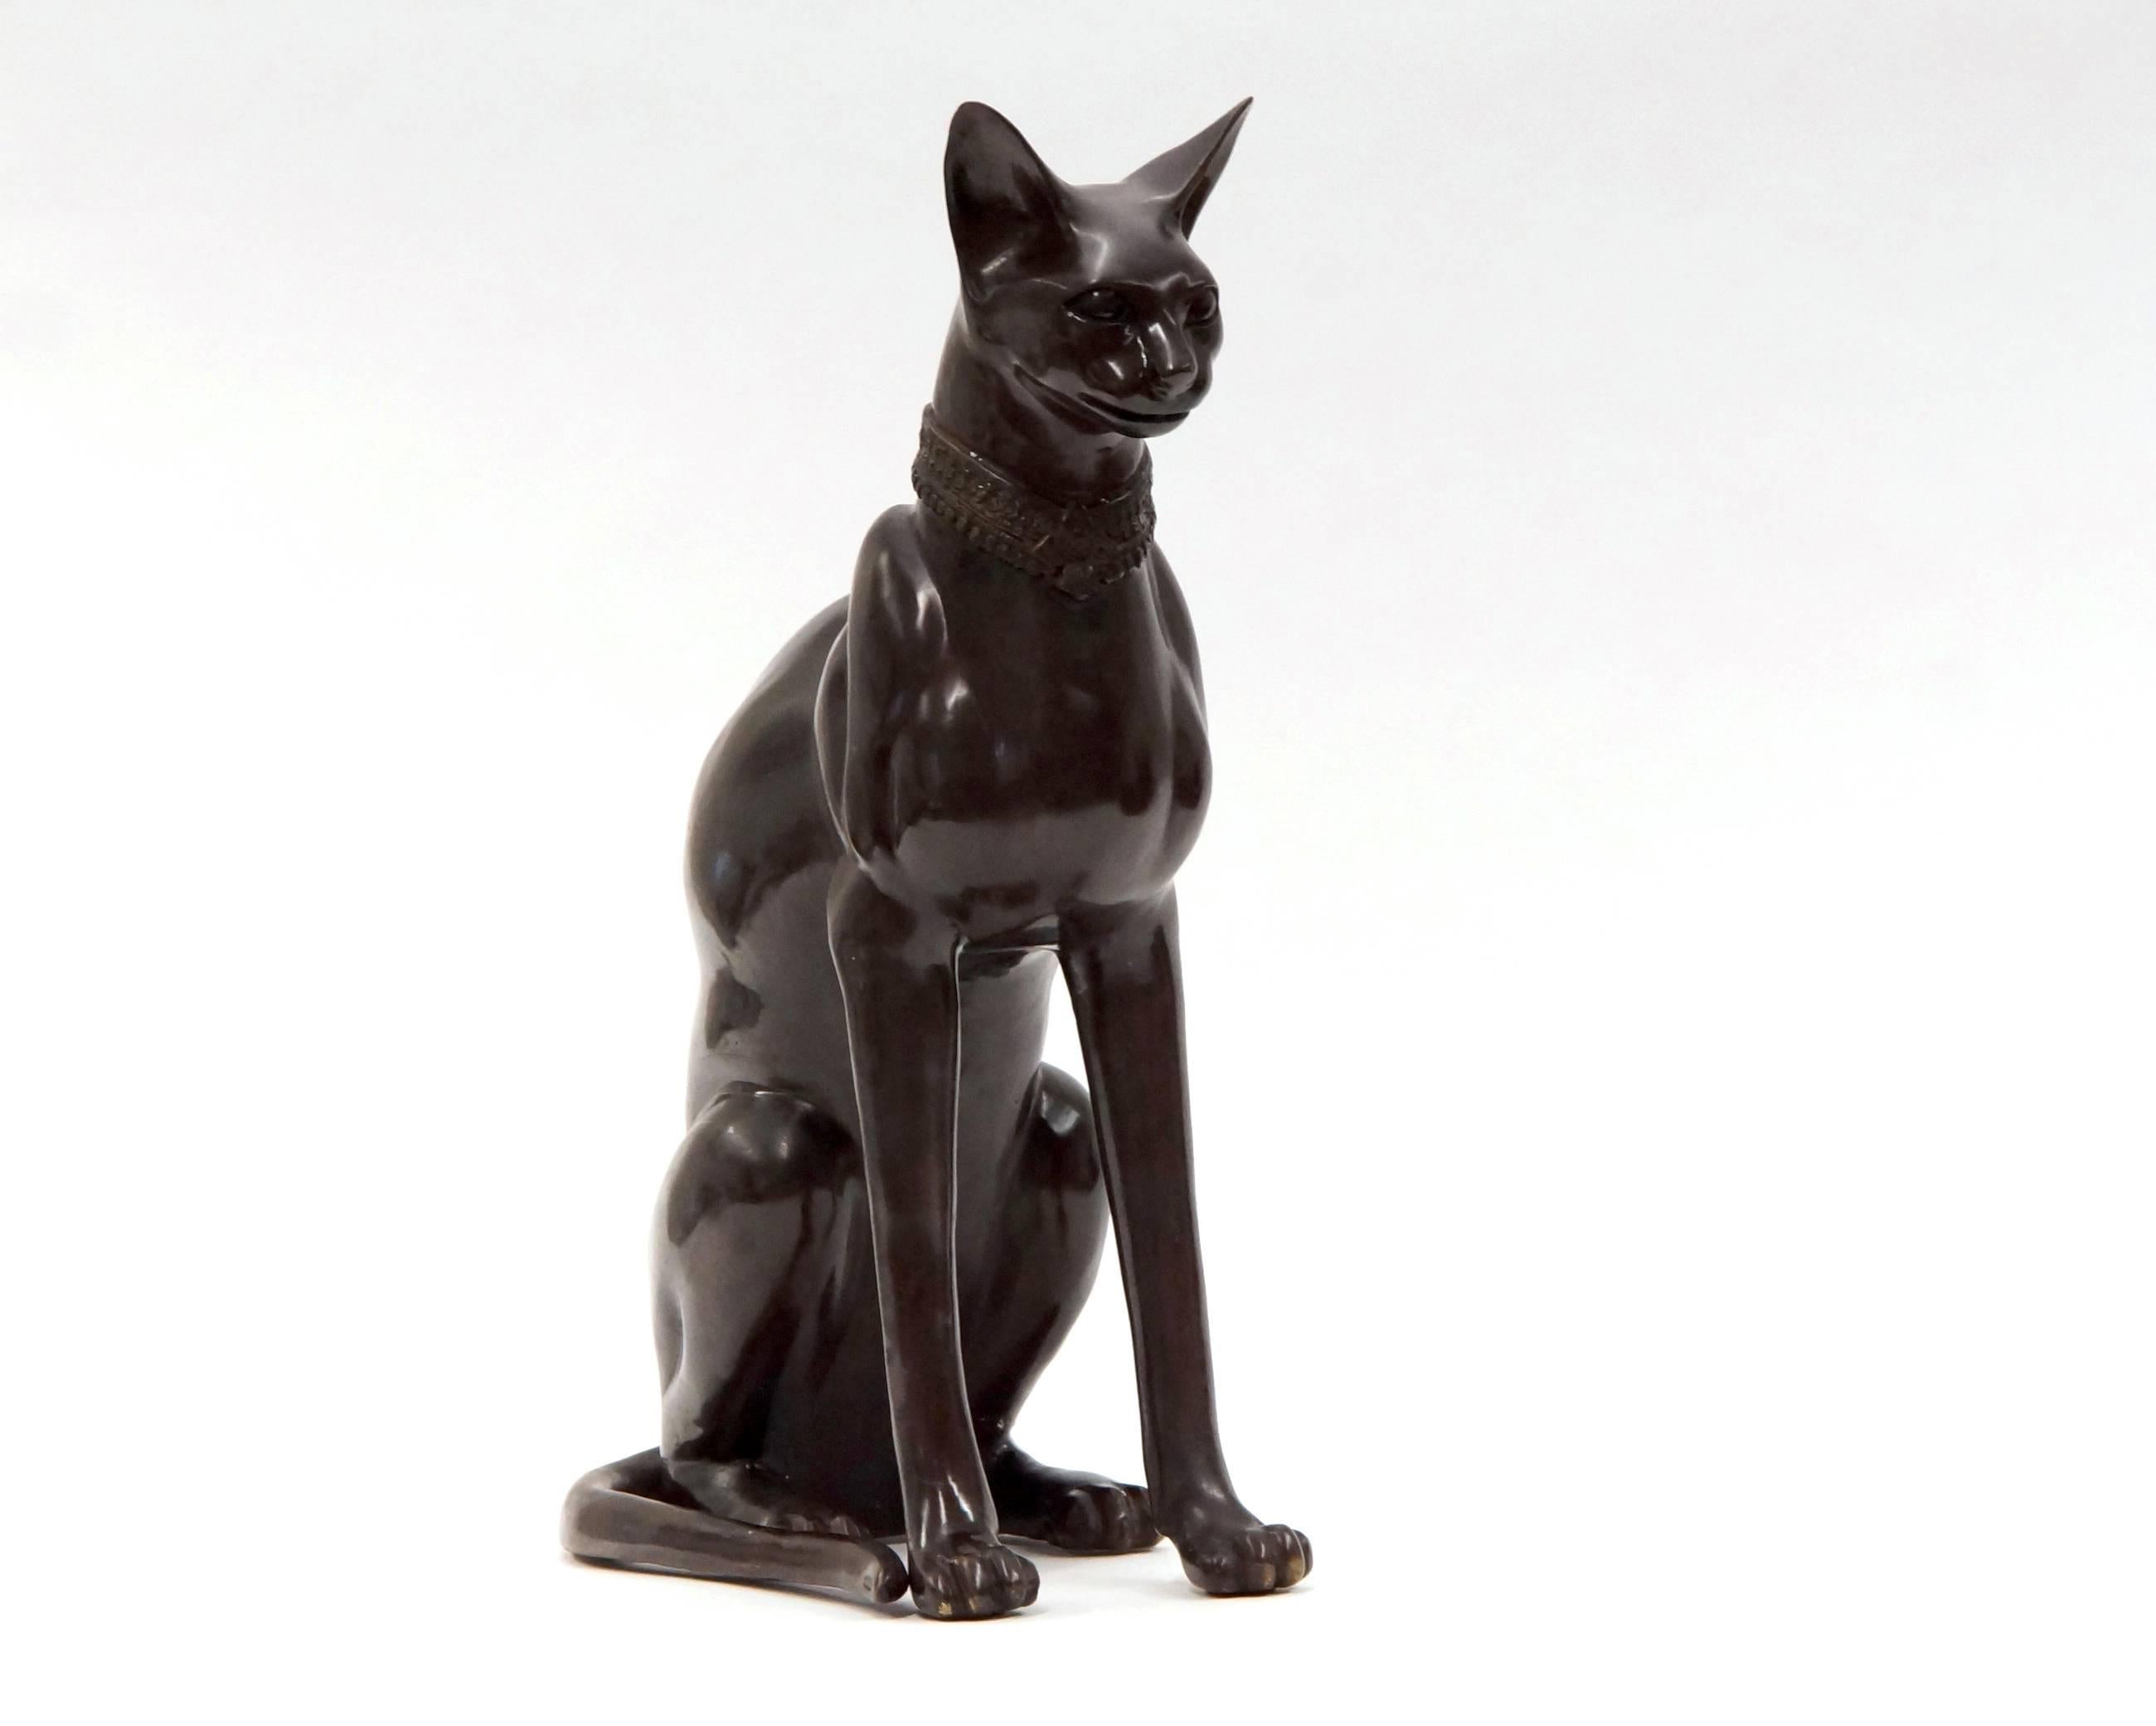 Beautiful bronze Egyptian cat, signed by A. Tiot. This beautiful piece will make a great stand in any room. The massive height of 61 cm makes this cat feels a new roommate for your home. The cat was bought in the 1970s and has a great patina. The